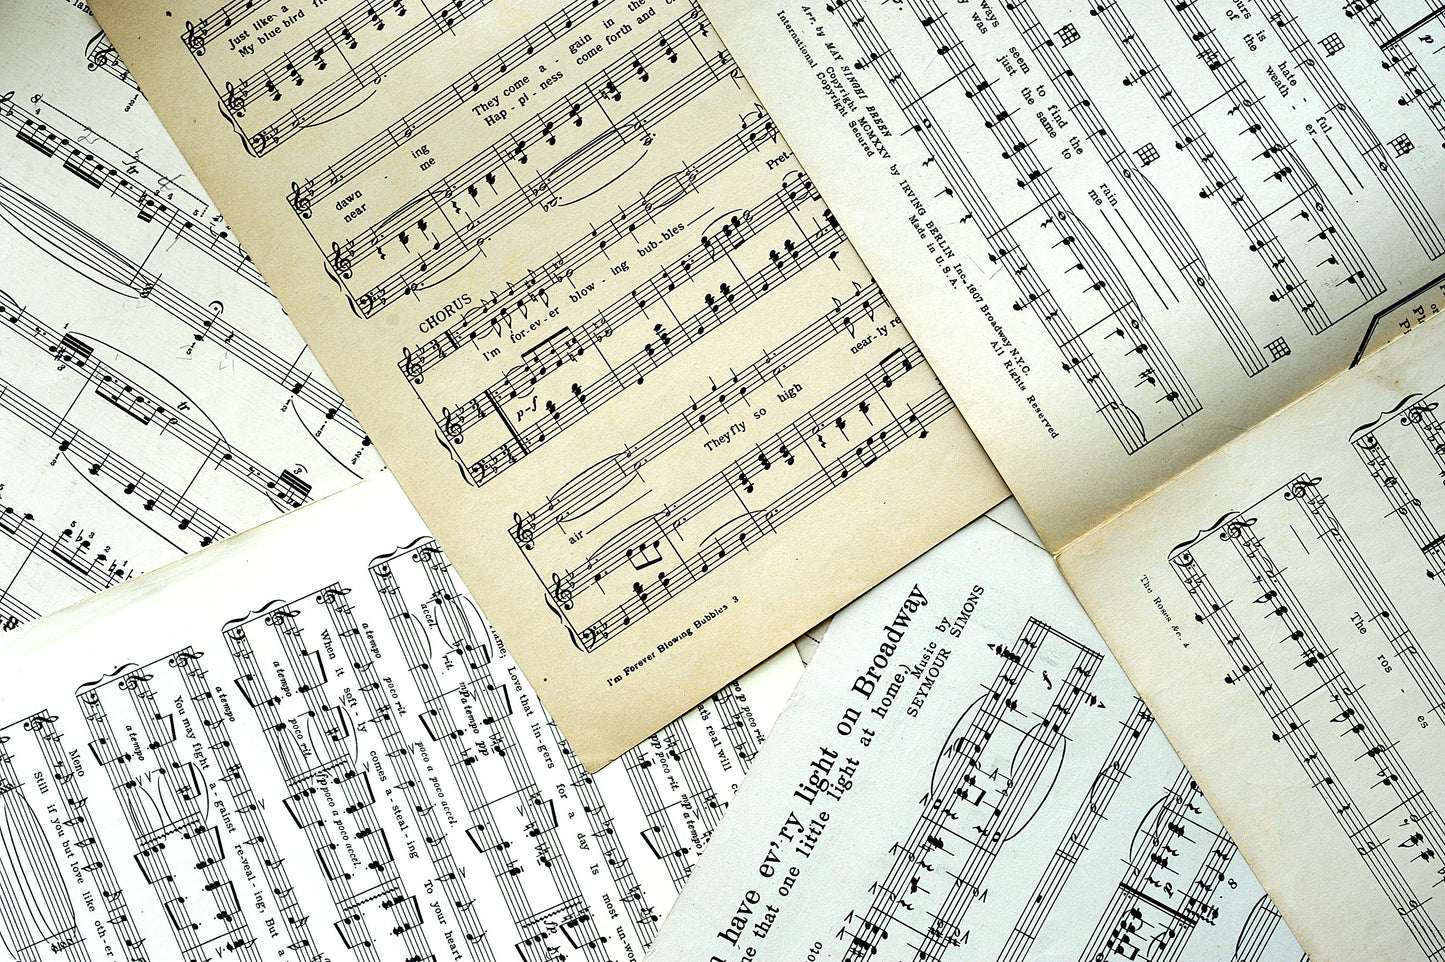 Pages for repurposing: 1/8 lb mix of vintage sheet music